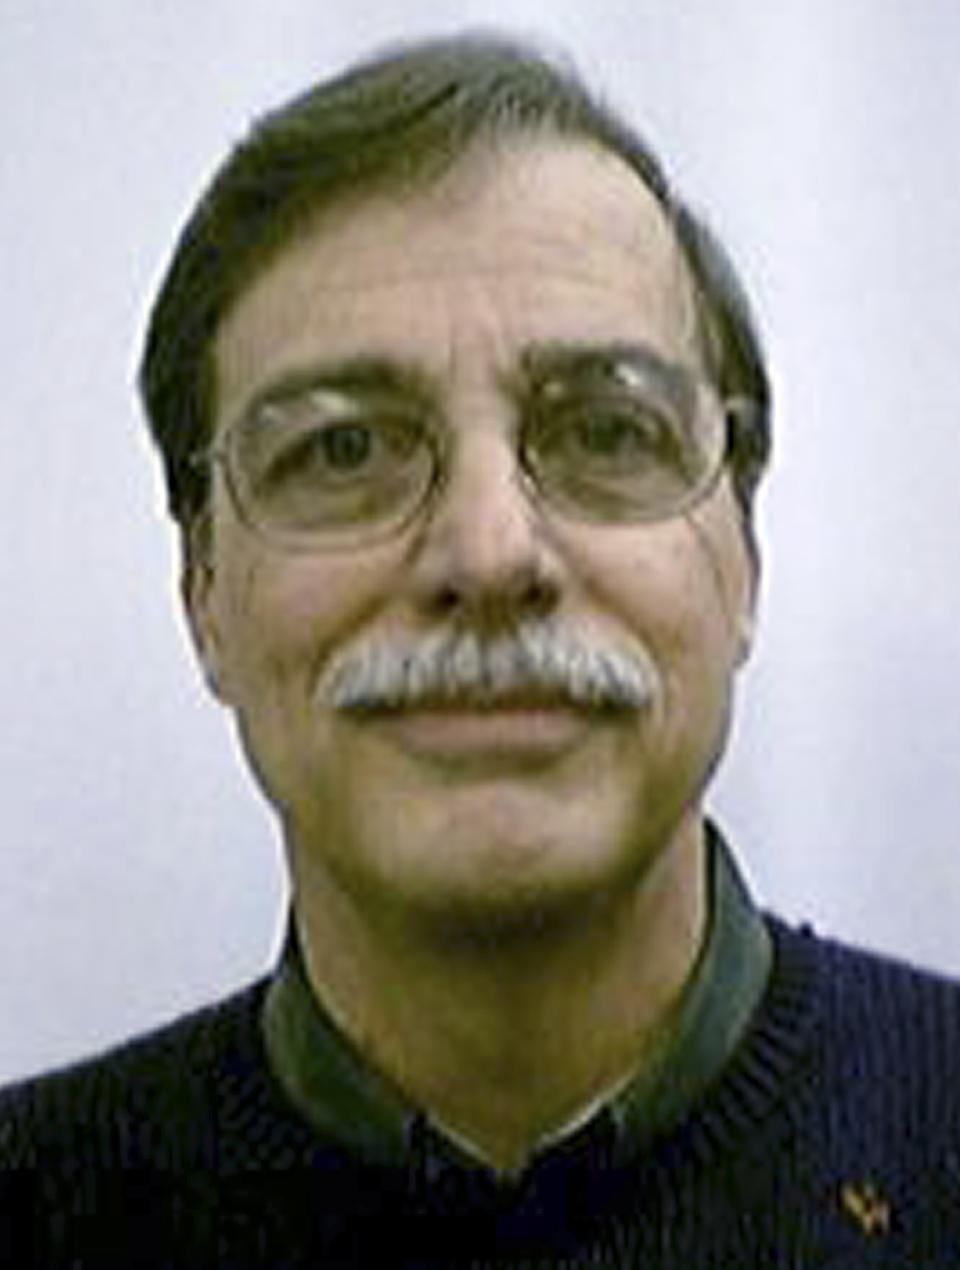 This undated photo provided by the University of Connecticut shows music professor Robert Miller at the school in Storrs, Conn. University officials knew of sexual abuse allegations against Miller a decade before taking action, according to independent investigative report released Wednesday, Feb. 26, 2014. Officials were notified on several occasions of Miller's on-campus behavior, and reports that he had abused children. (AP Photo/University of Connecticut)